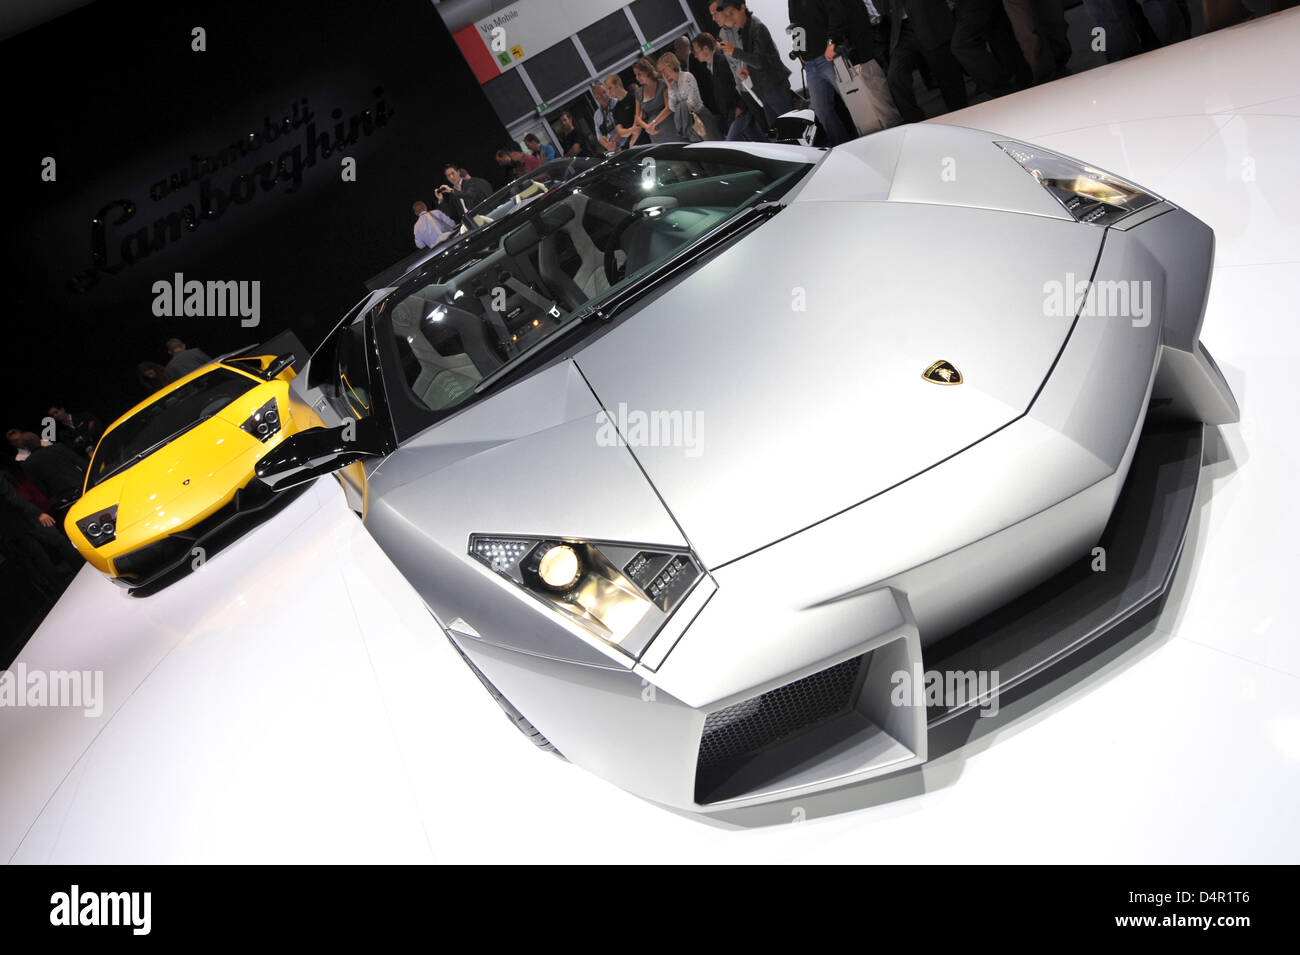 Lamborghini presents its Reventon Roadster on the press day of the Frankfurt Motor Show (IAA) in Frankfurt Main, Germany, 15 September 2009. The 63rd IAA opens for regular customers from 17 to 27 September 2009. Photo: UWE ZUCCHI Stock Photo